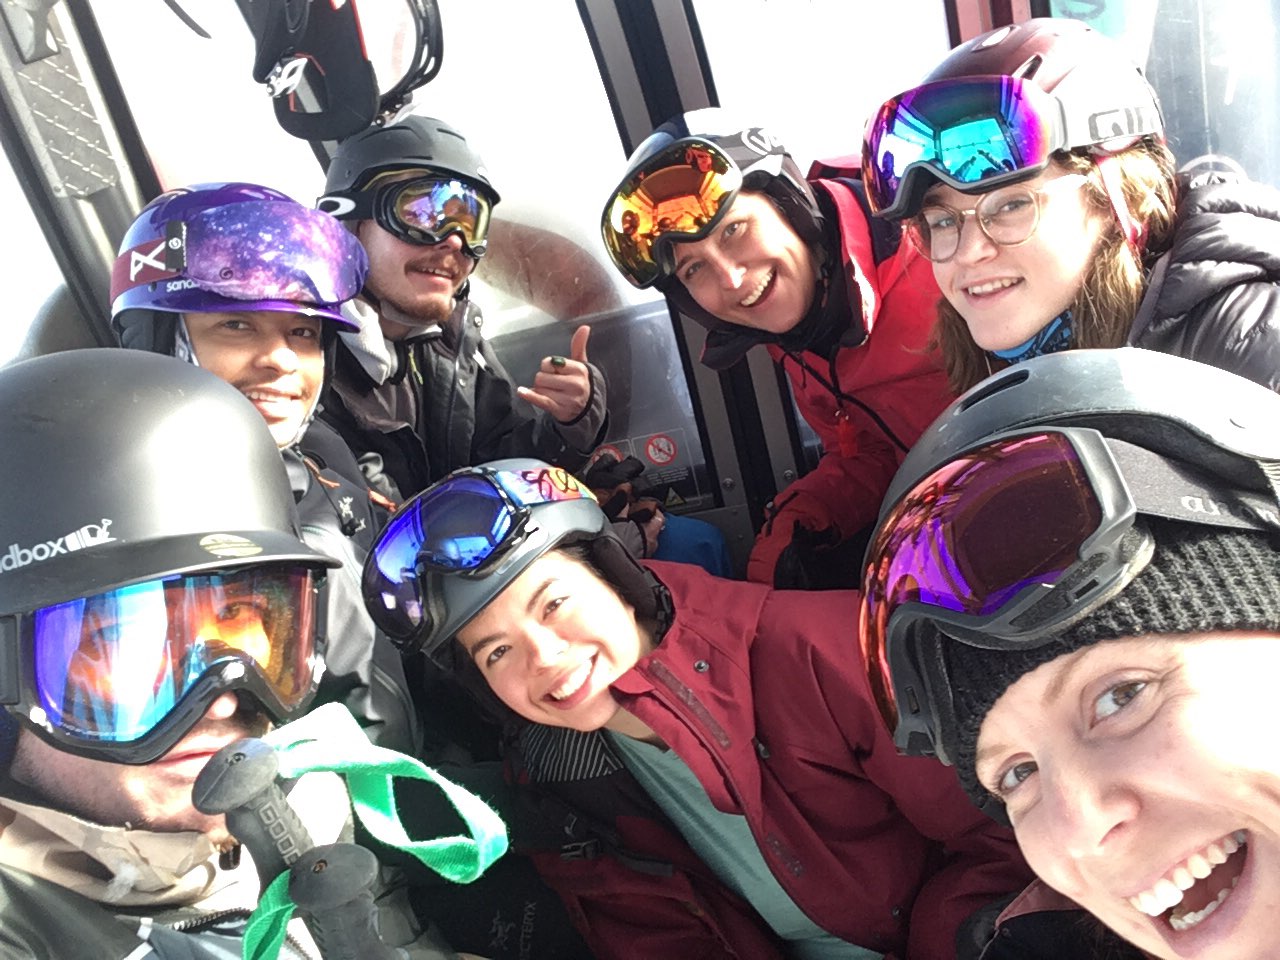 Zero Ceiling youth smiling together while snowboarding